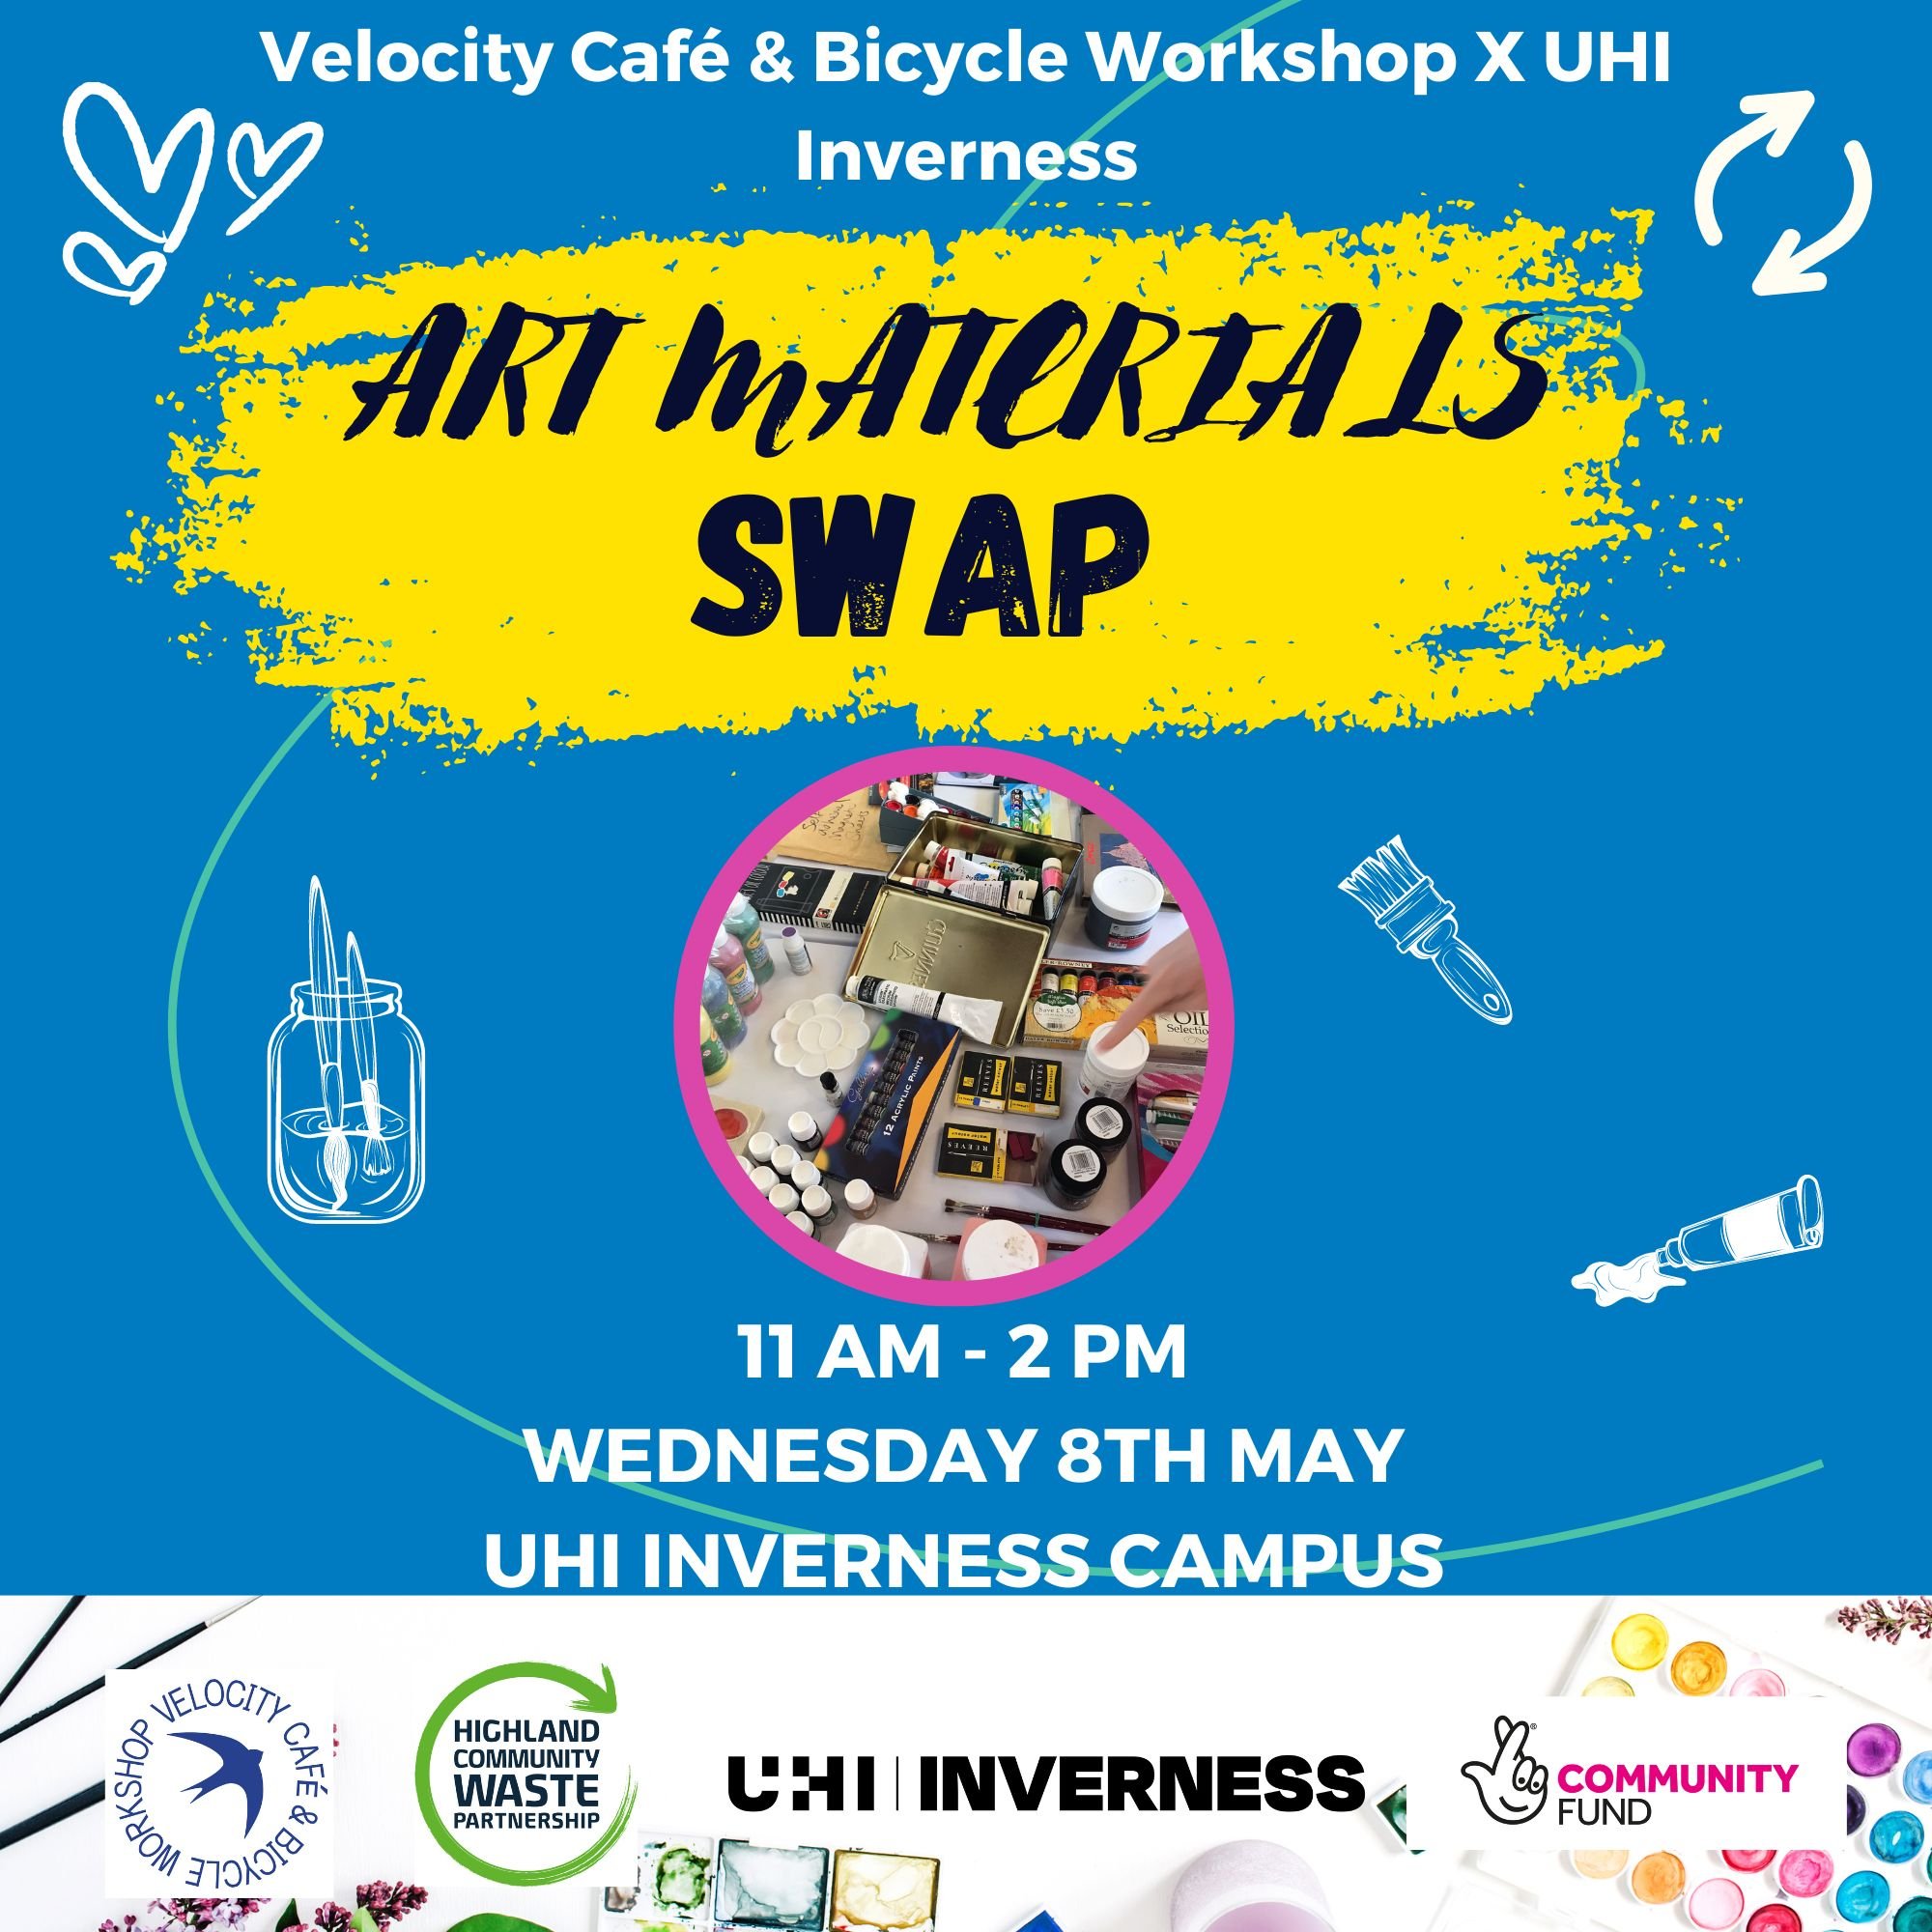 Calling all UHI art students, alumni and all student artists and creatives! 

✨🔄Along with @UHIInverness we are hosting a free ART MATERIALS SWAP event on WEDNESDAY 8TH MAY🔄✨

Do you have lightly-used or new art materials that have been collecting 